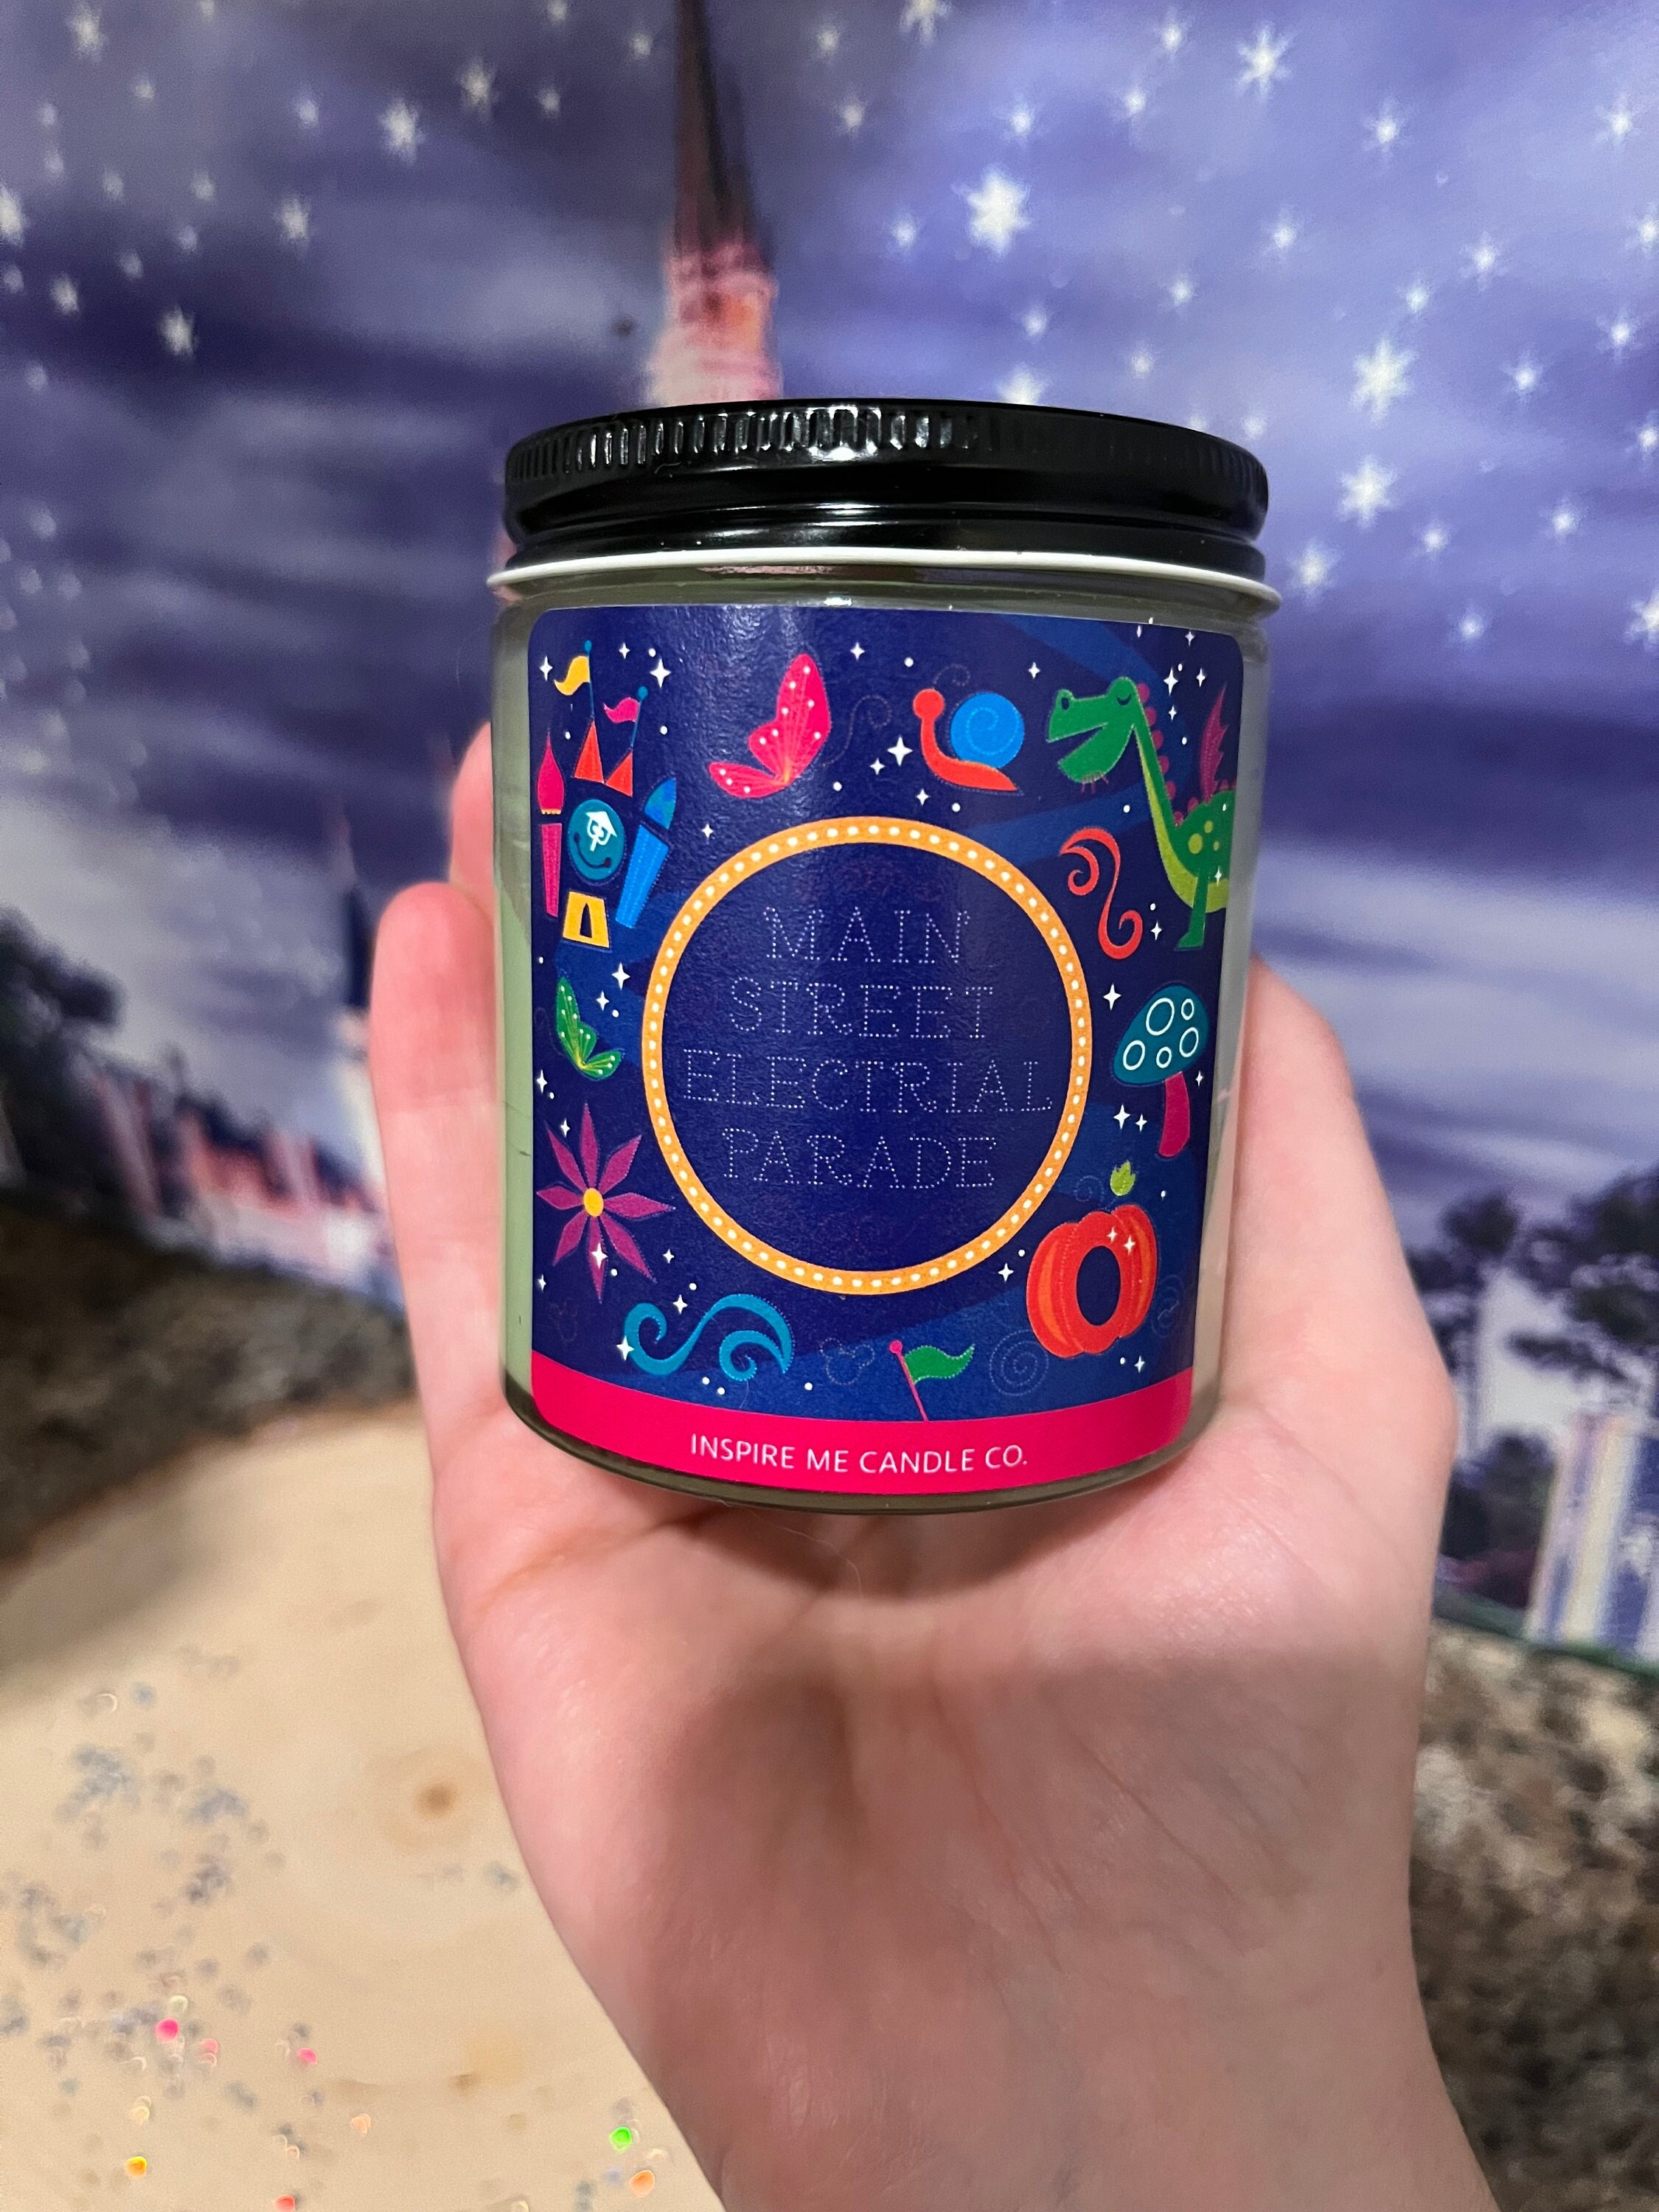 Park Scents 33 Candle - Luxury Scented Candle - Inspired by Club 33 at Disneyland - Handmade in The USA - Soy Blend | 8 oz Tin